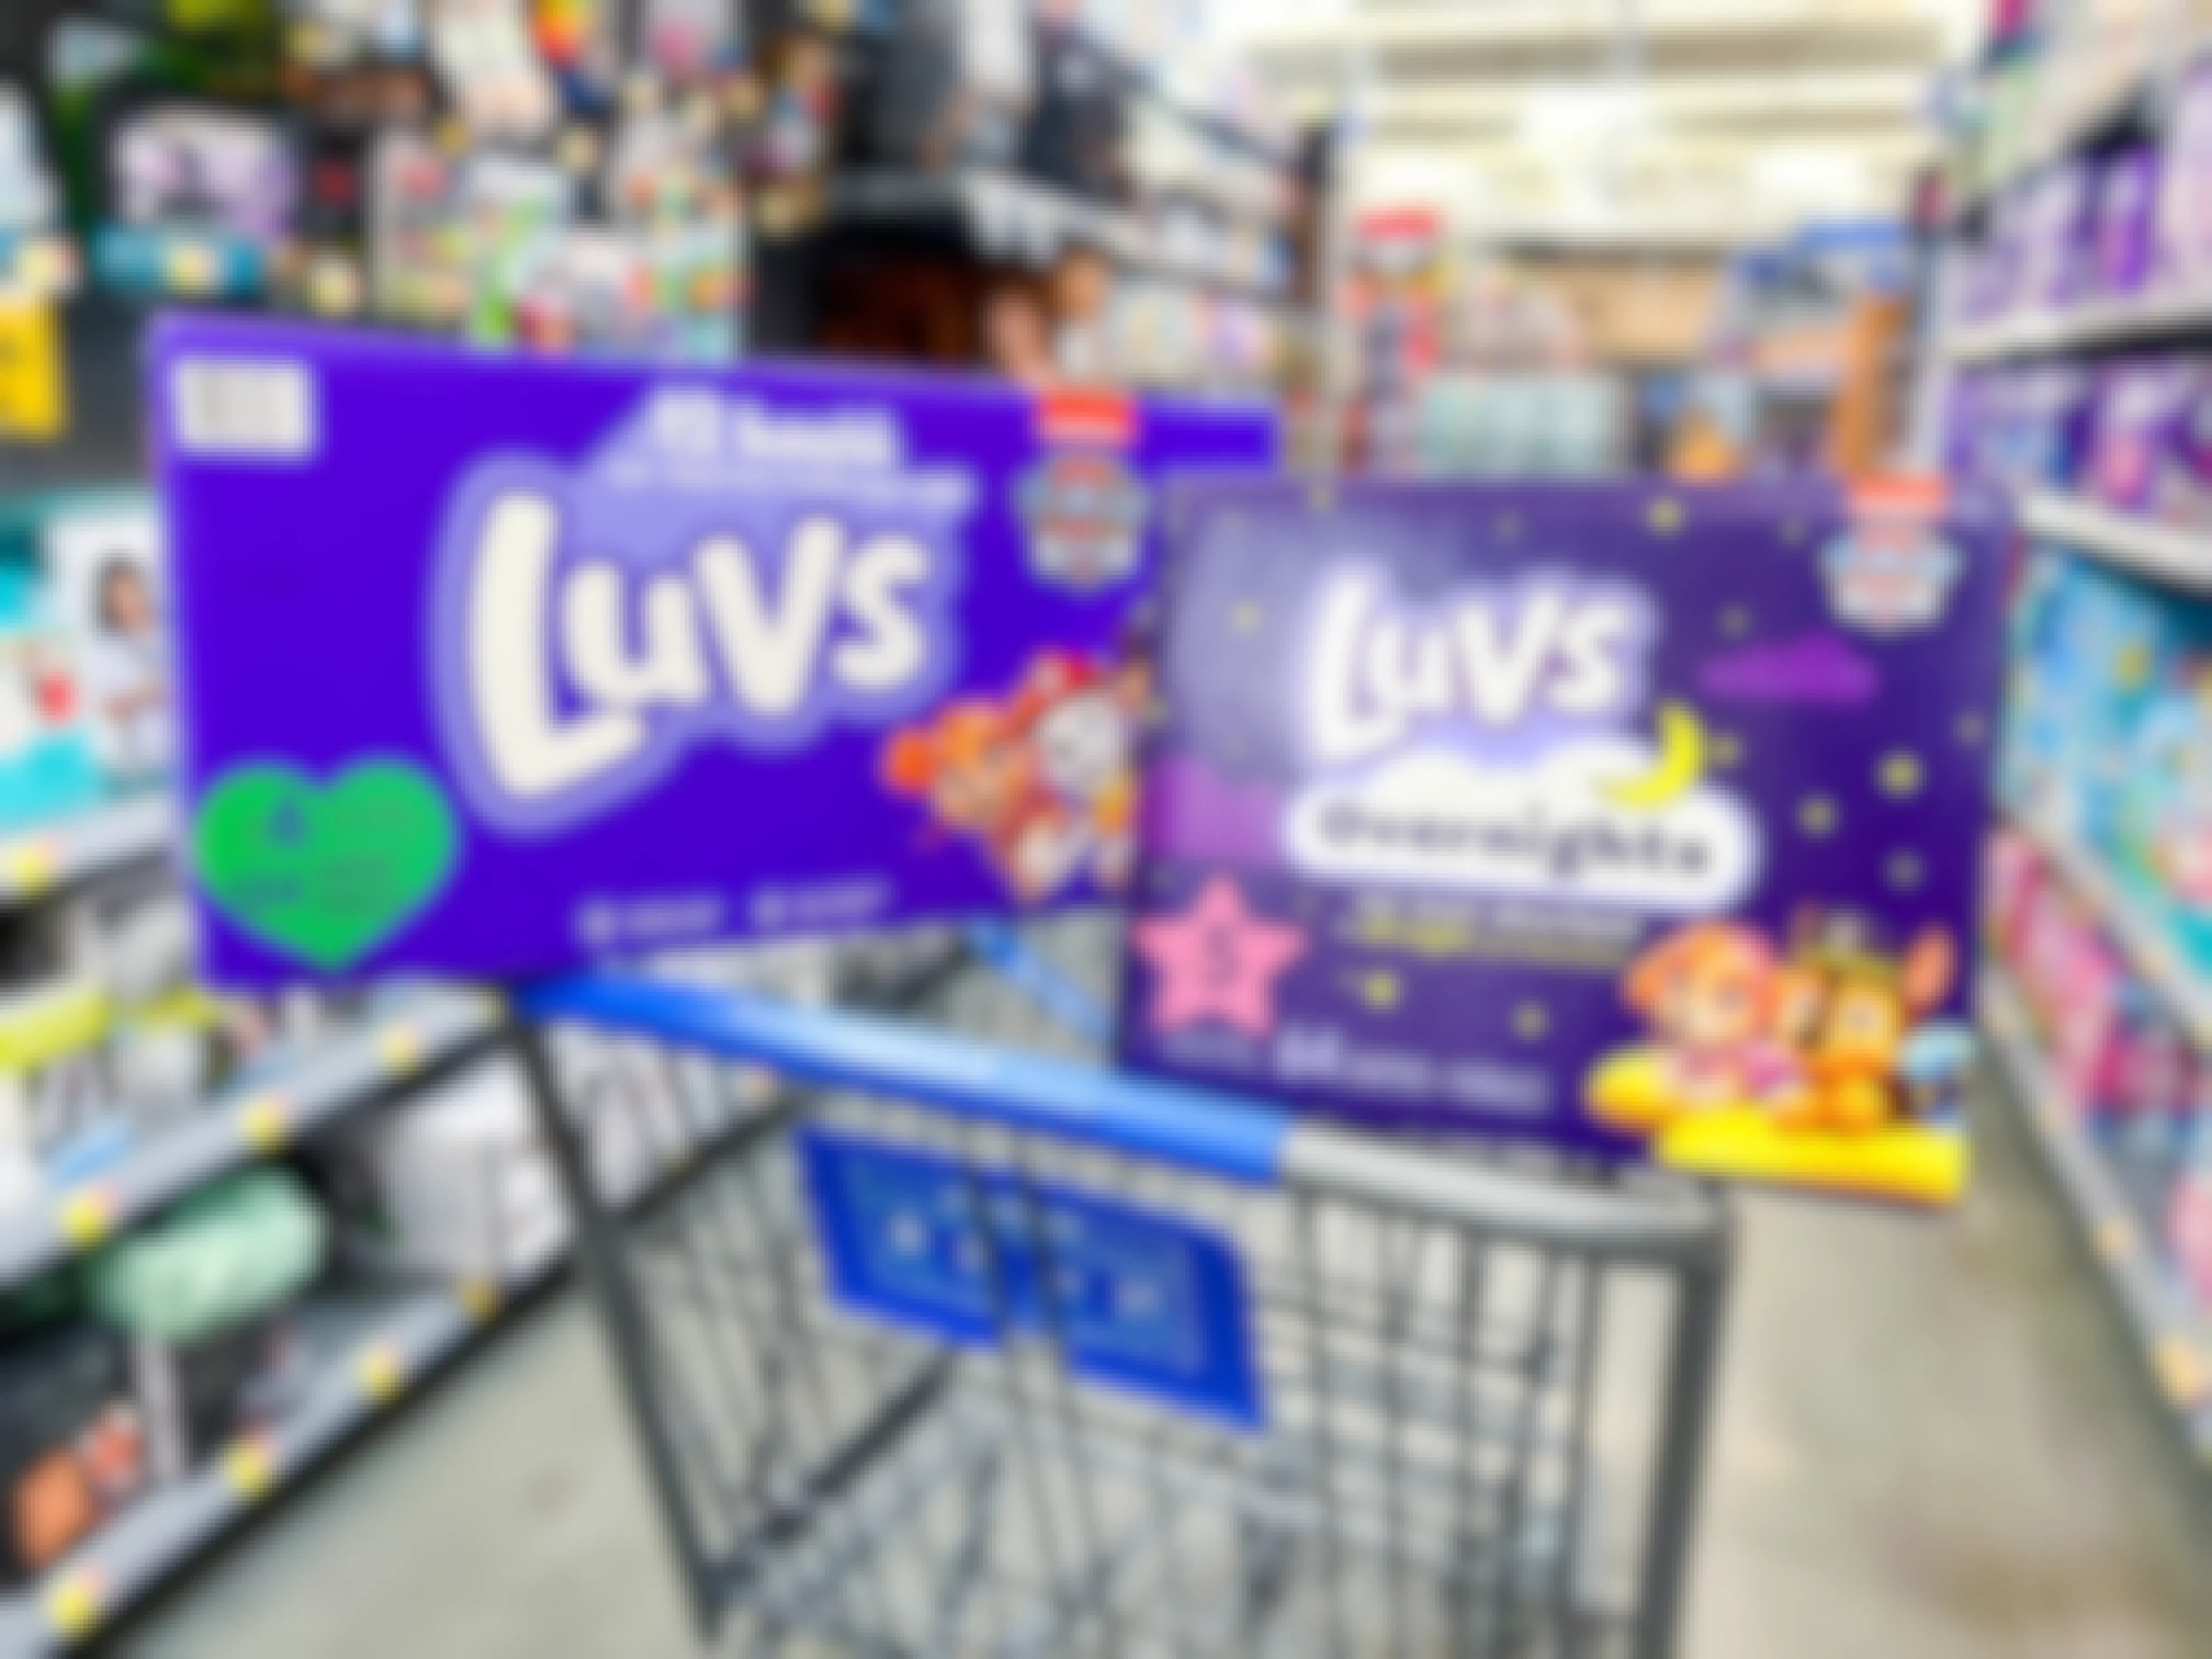 Big boxes of luvs overnight size 5 and luvs diapers size 6 in cart